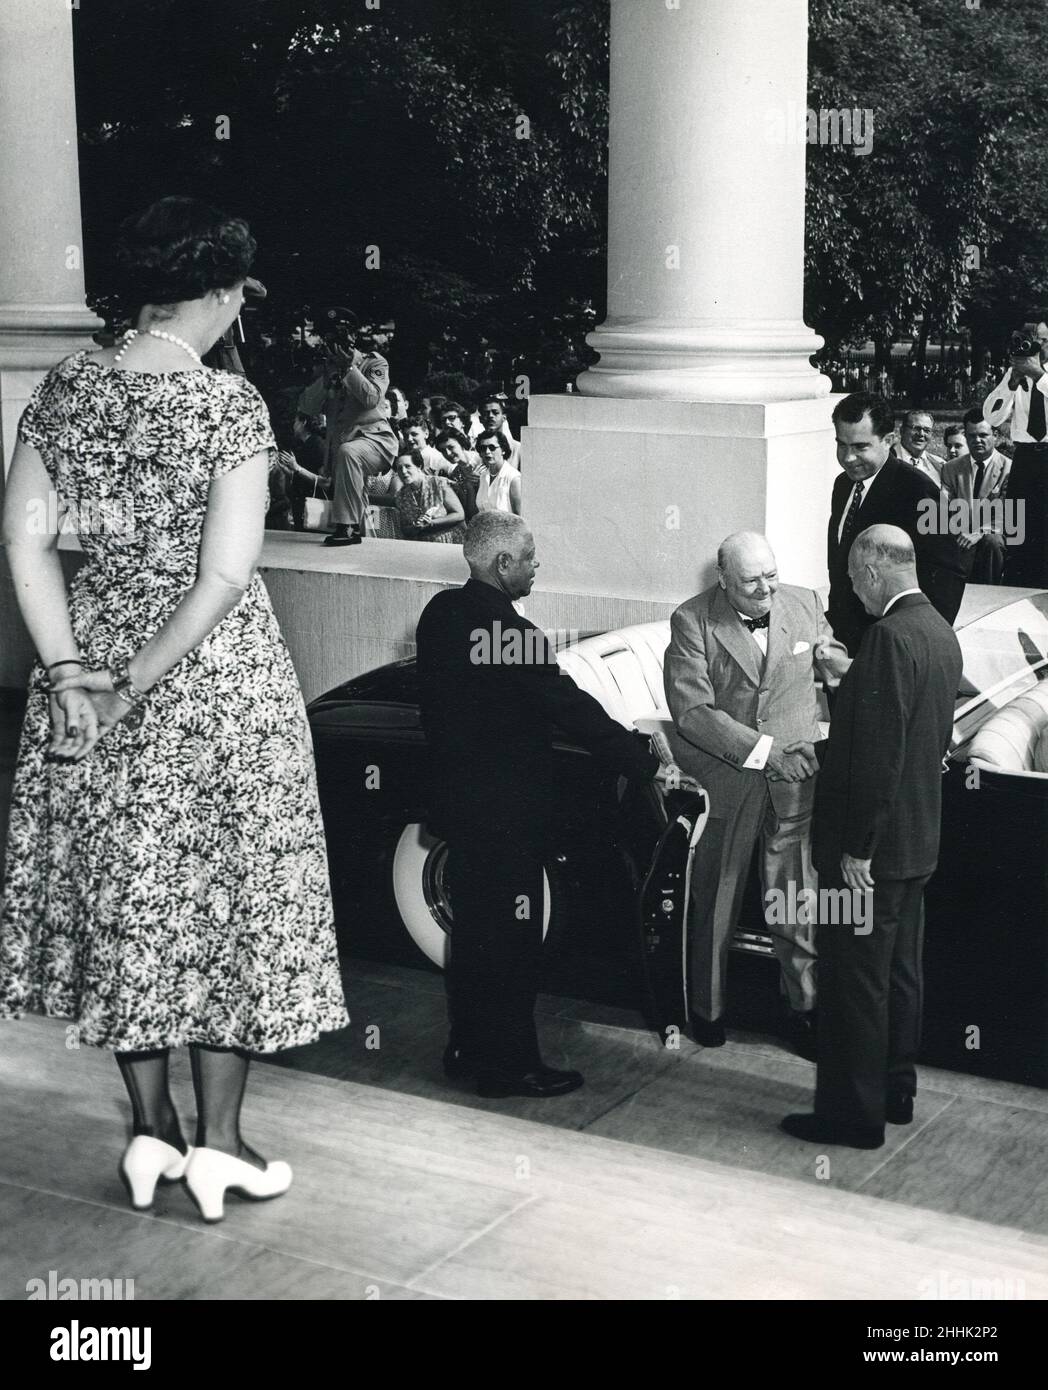 Washington, DC, June 25, 1954 - Mamie Eisenhower waits at the top of the steps as President Dwight Eisenhower greets Prime Minister Winston Churchill as he alights from a limosine at the White House. Vice-President Richard Nixon waits behind the British statesman. Stock Photo